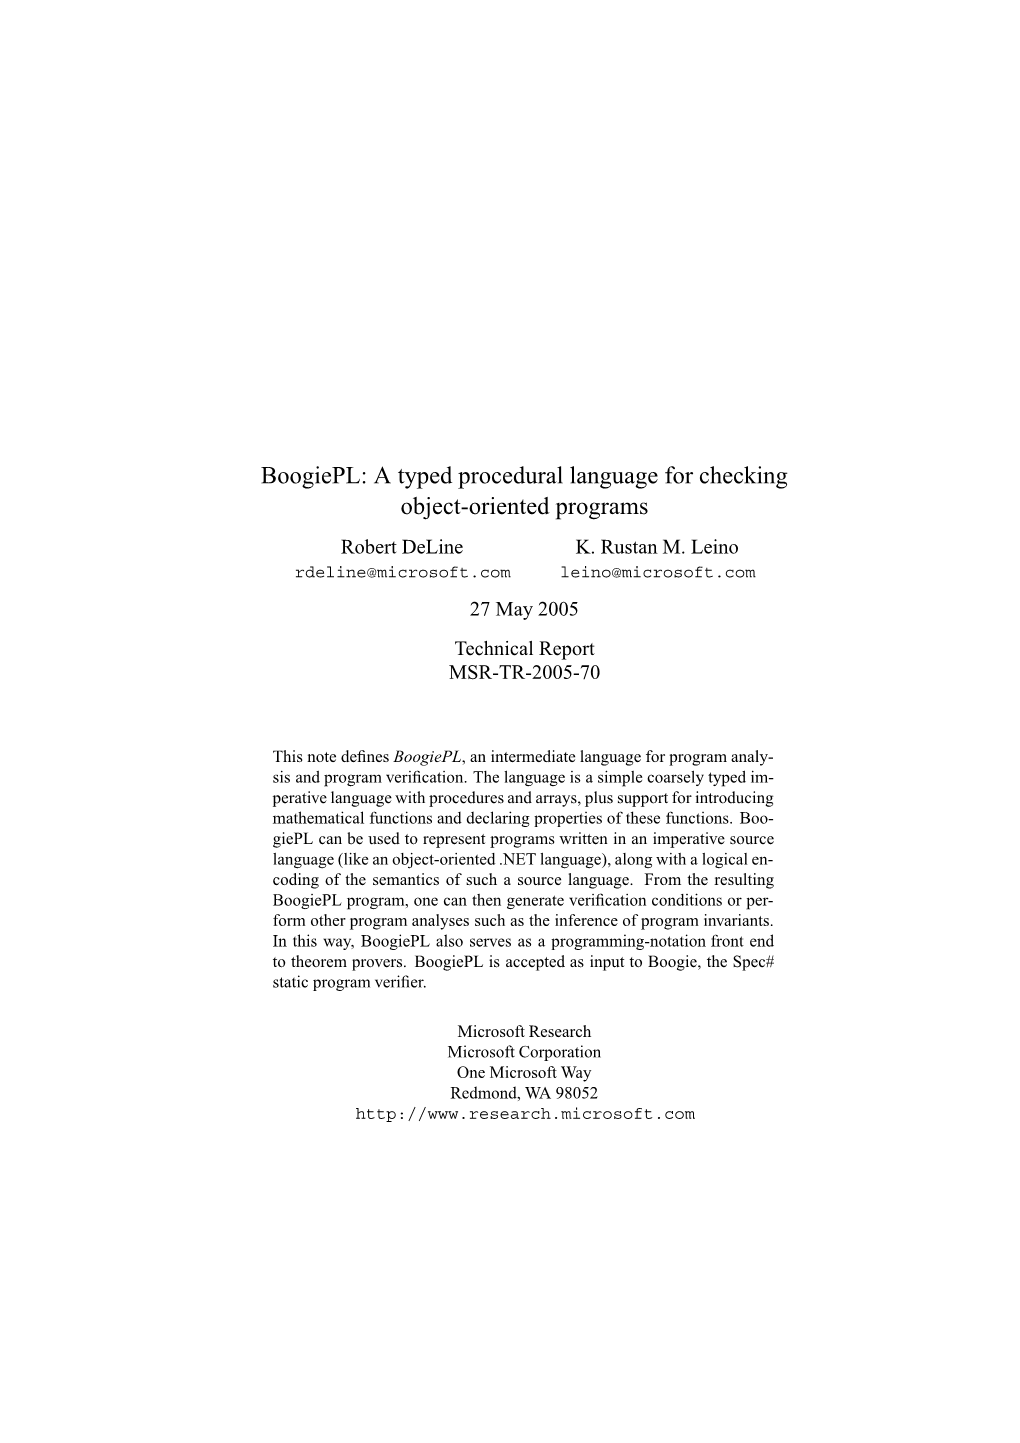 A Typed Procedural Language for Checking Object-Oriented Programs Robert Deline K